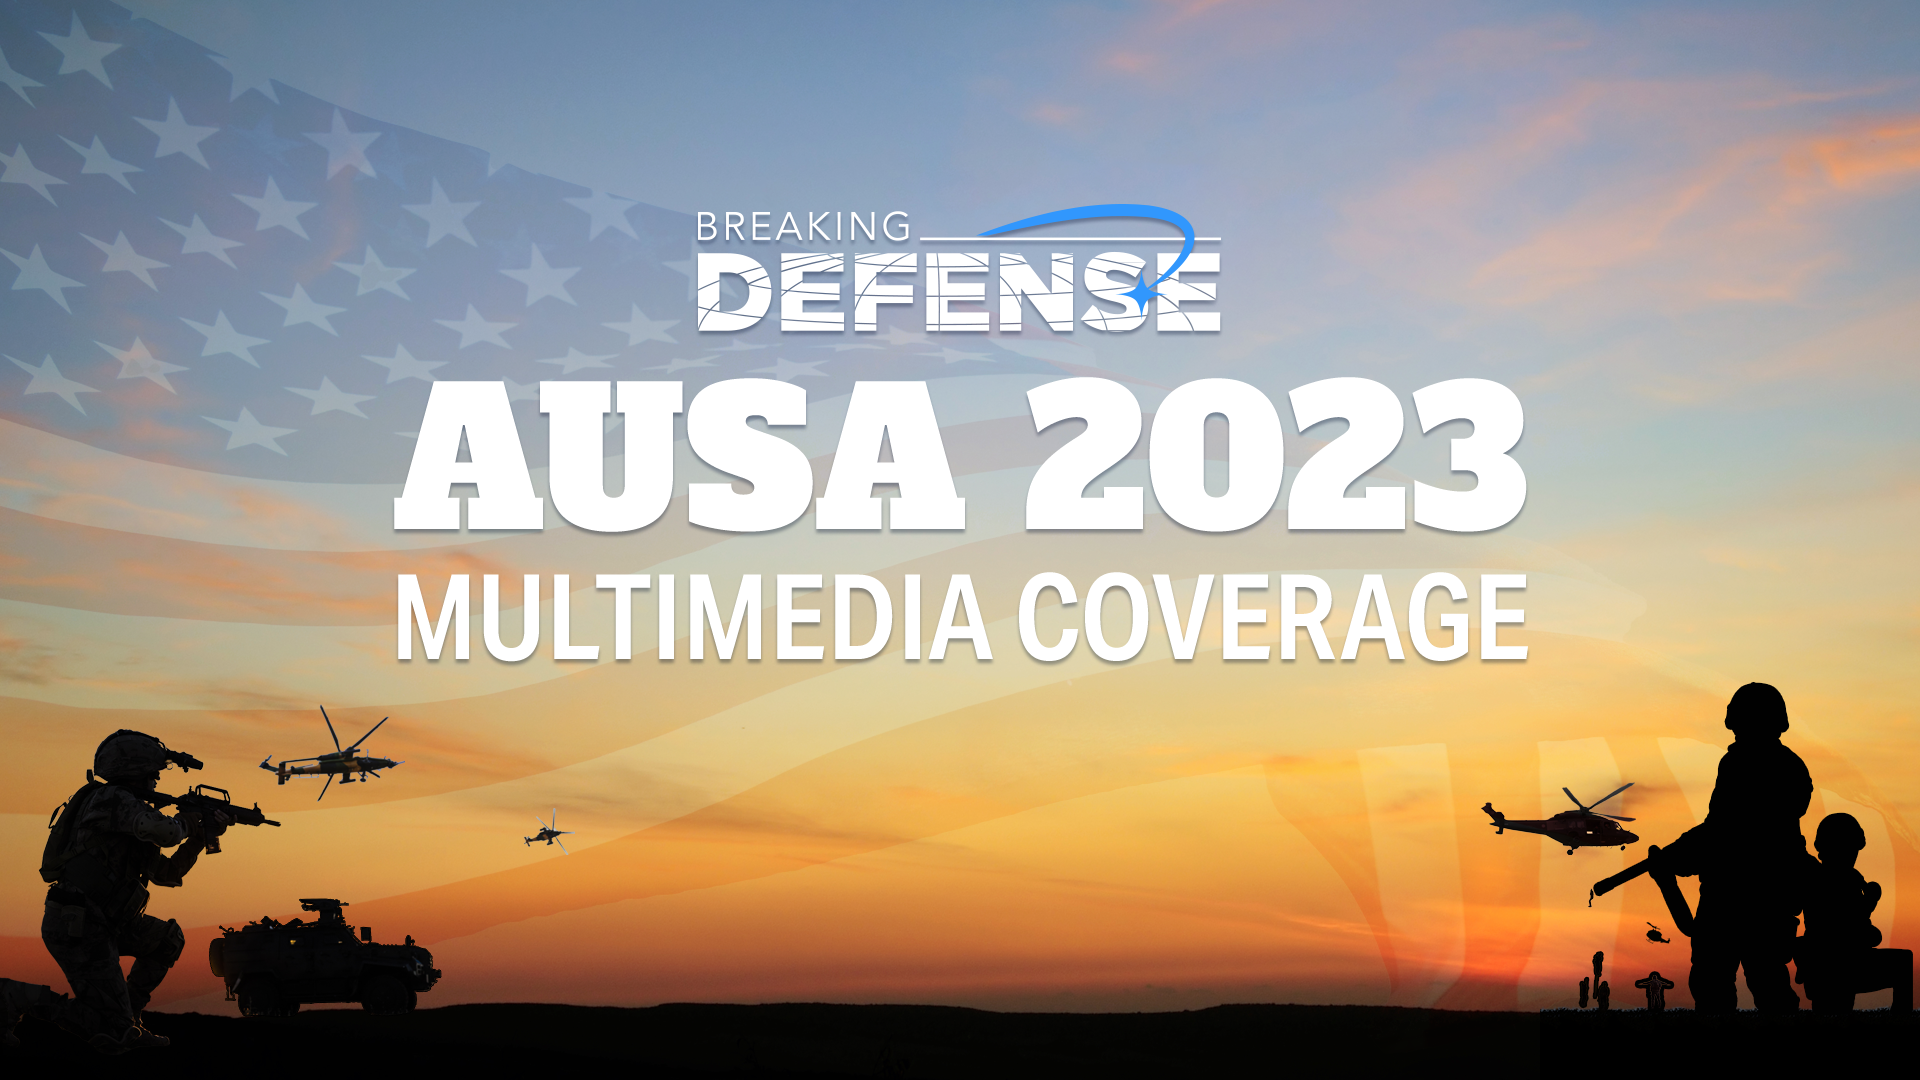 Where to find the sights and sounds of AUSA 2023